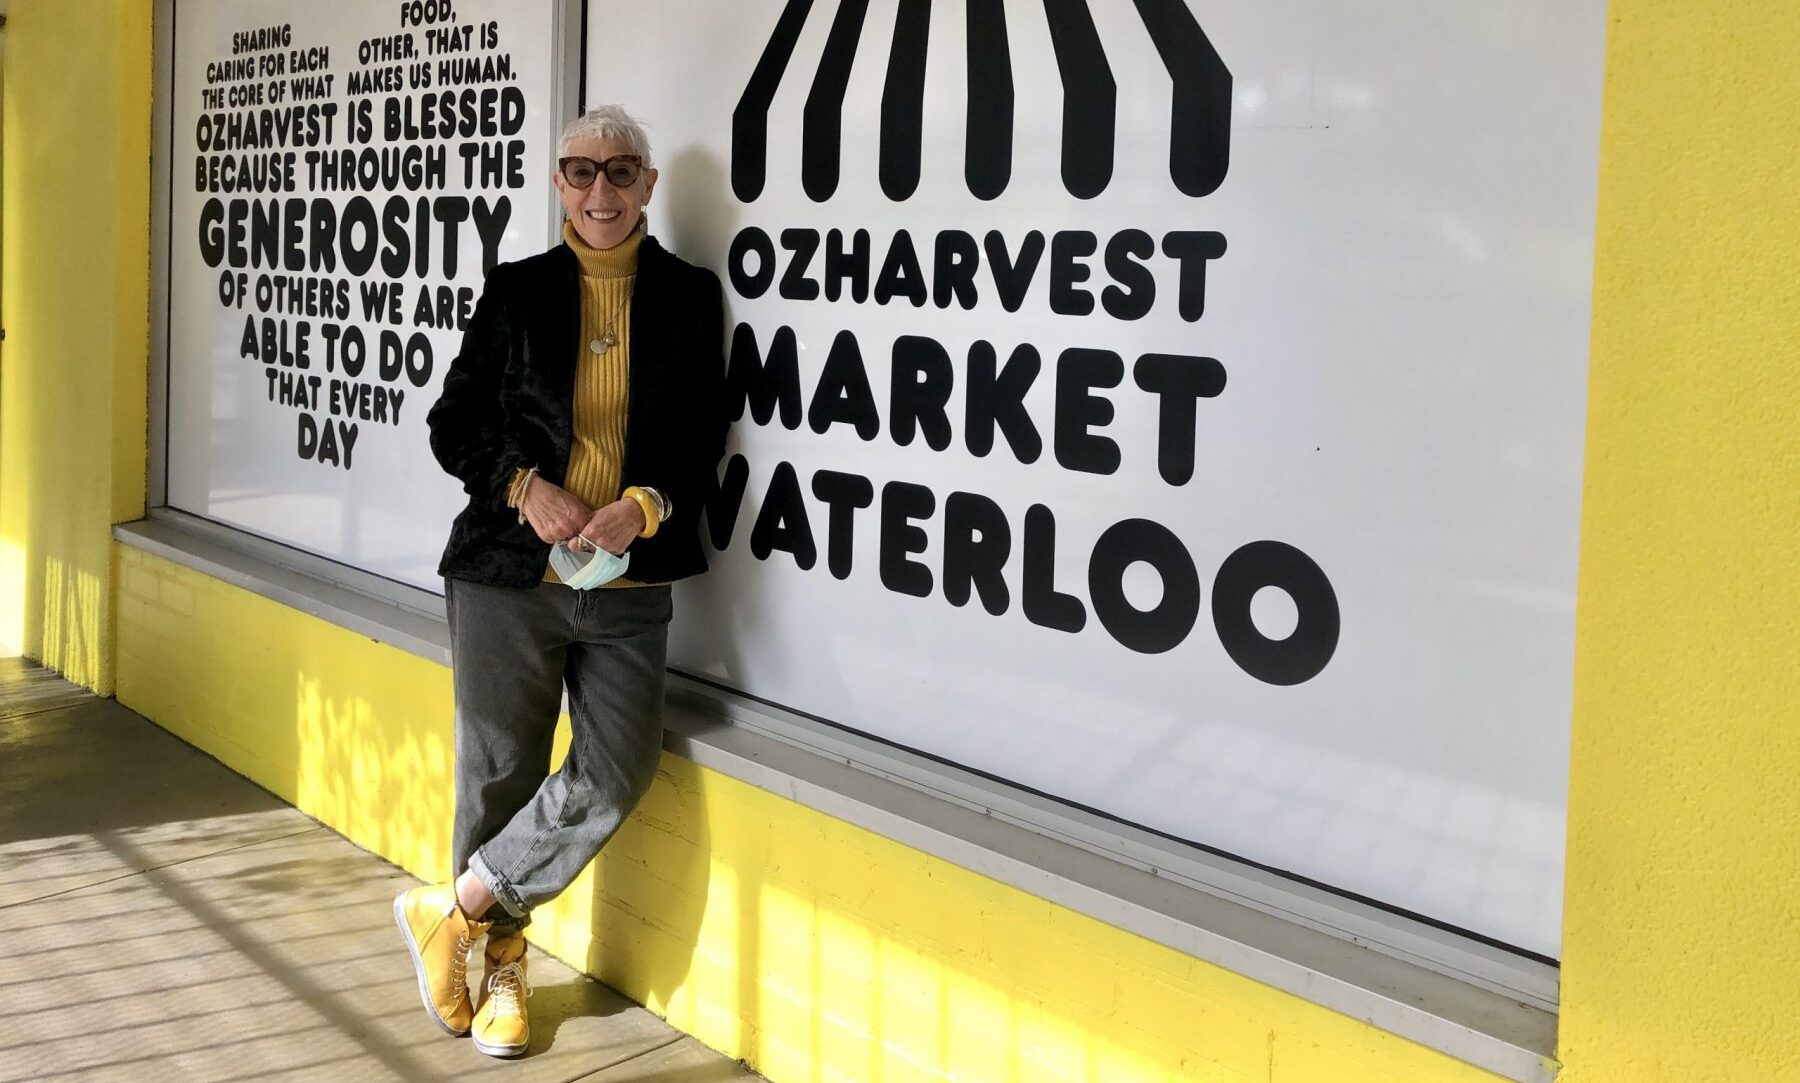 Ronnie Khan at OzHarvest market in Waterloo